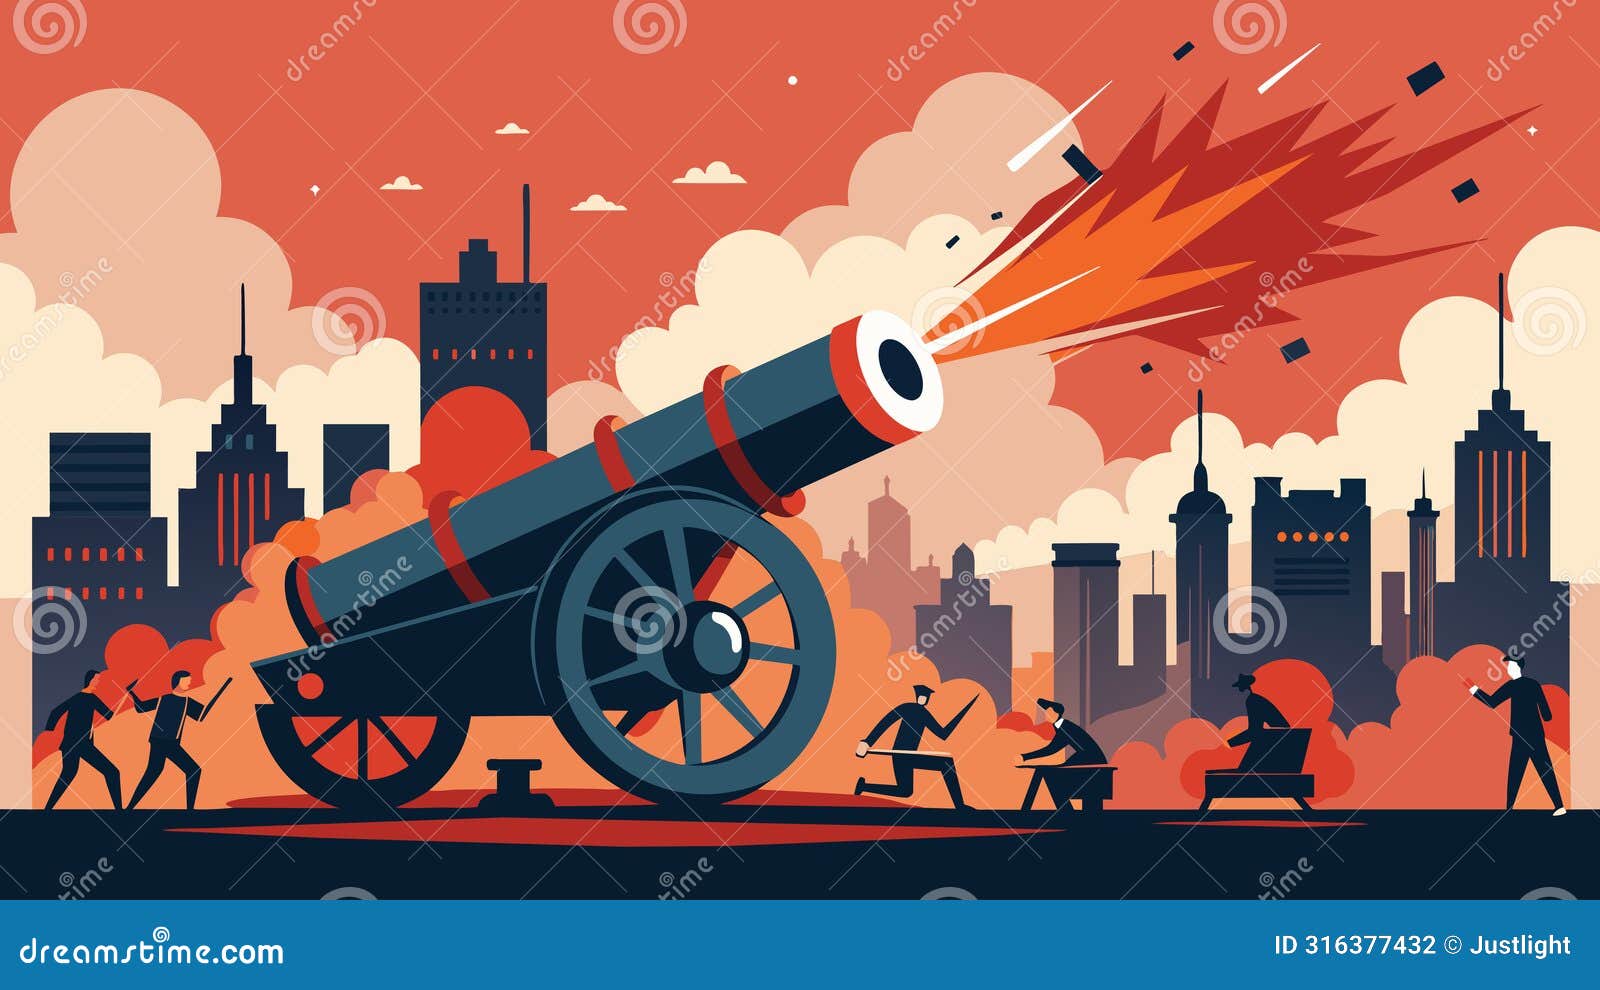 the deafening blast of the cannon echoes through the city a reminder of the freedoms won and the ones still to be fought